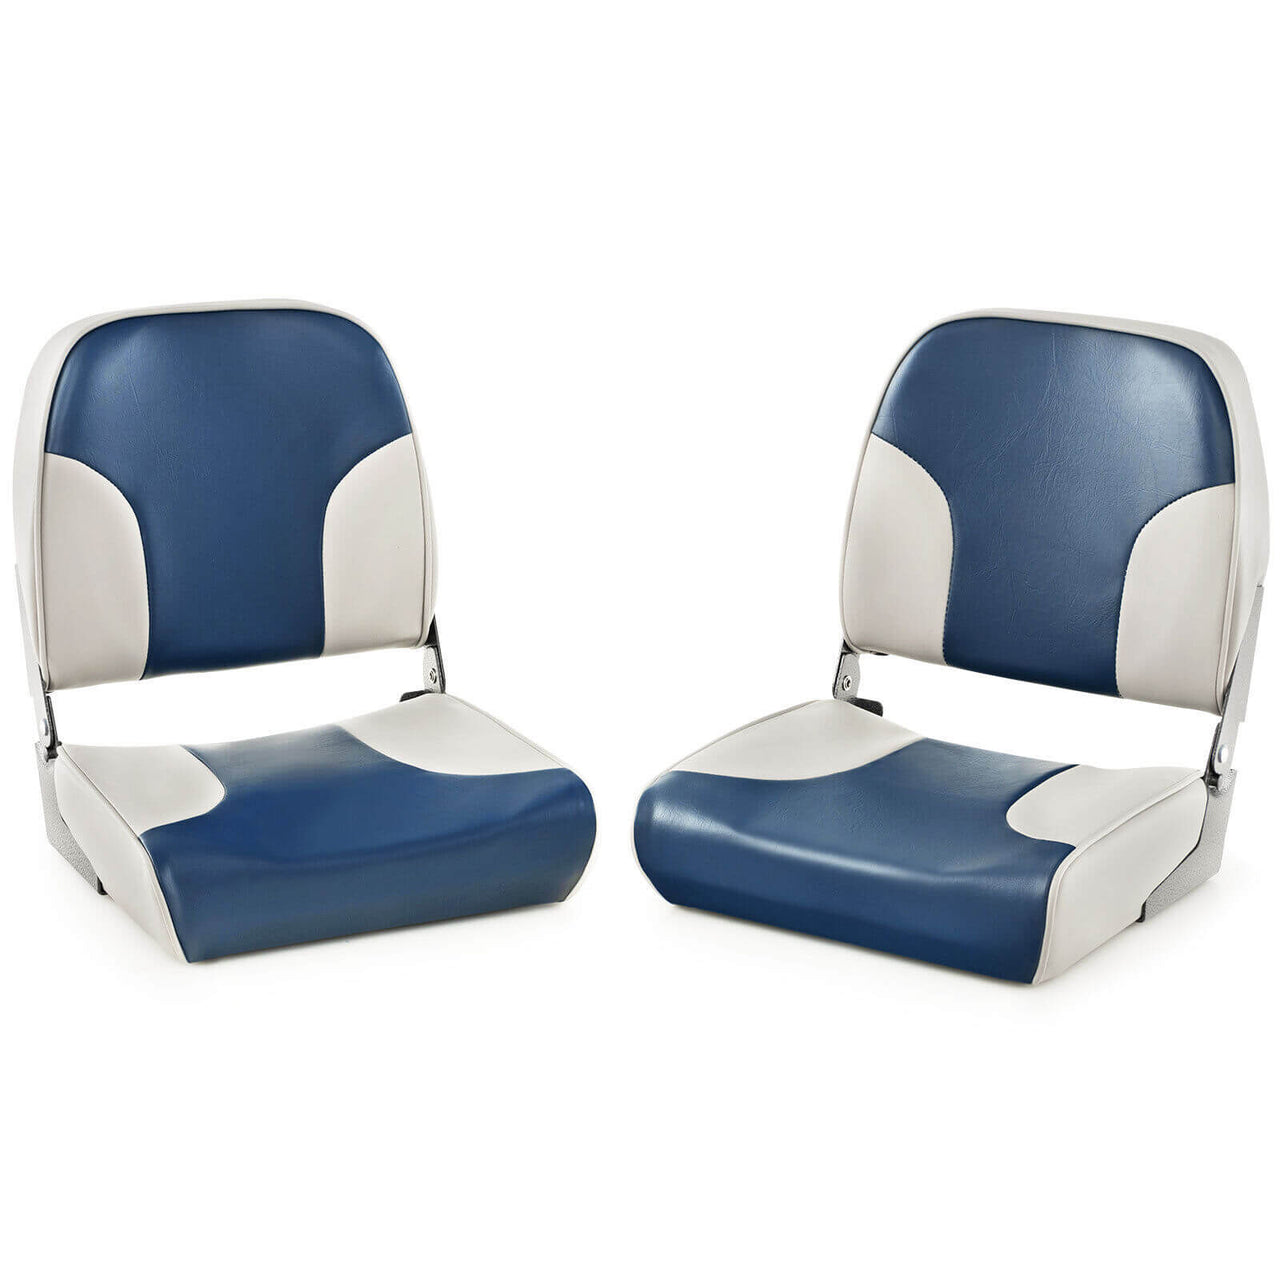 2 Pieces Low Back Boat Seat Set with Sponge Padding and Aluminum Hinges - Gallery View 4 of 11